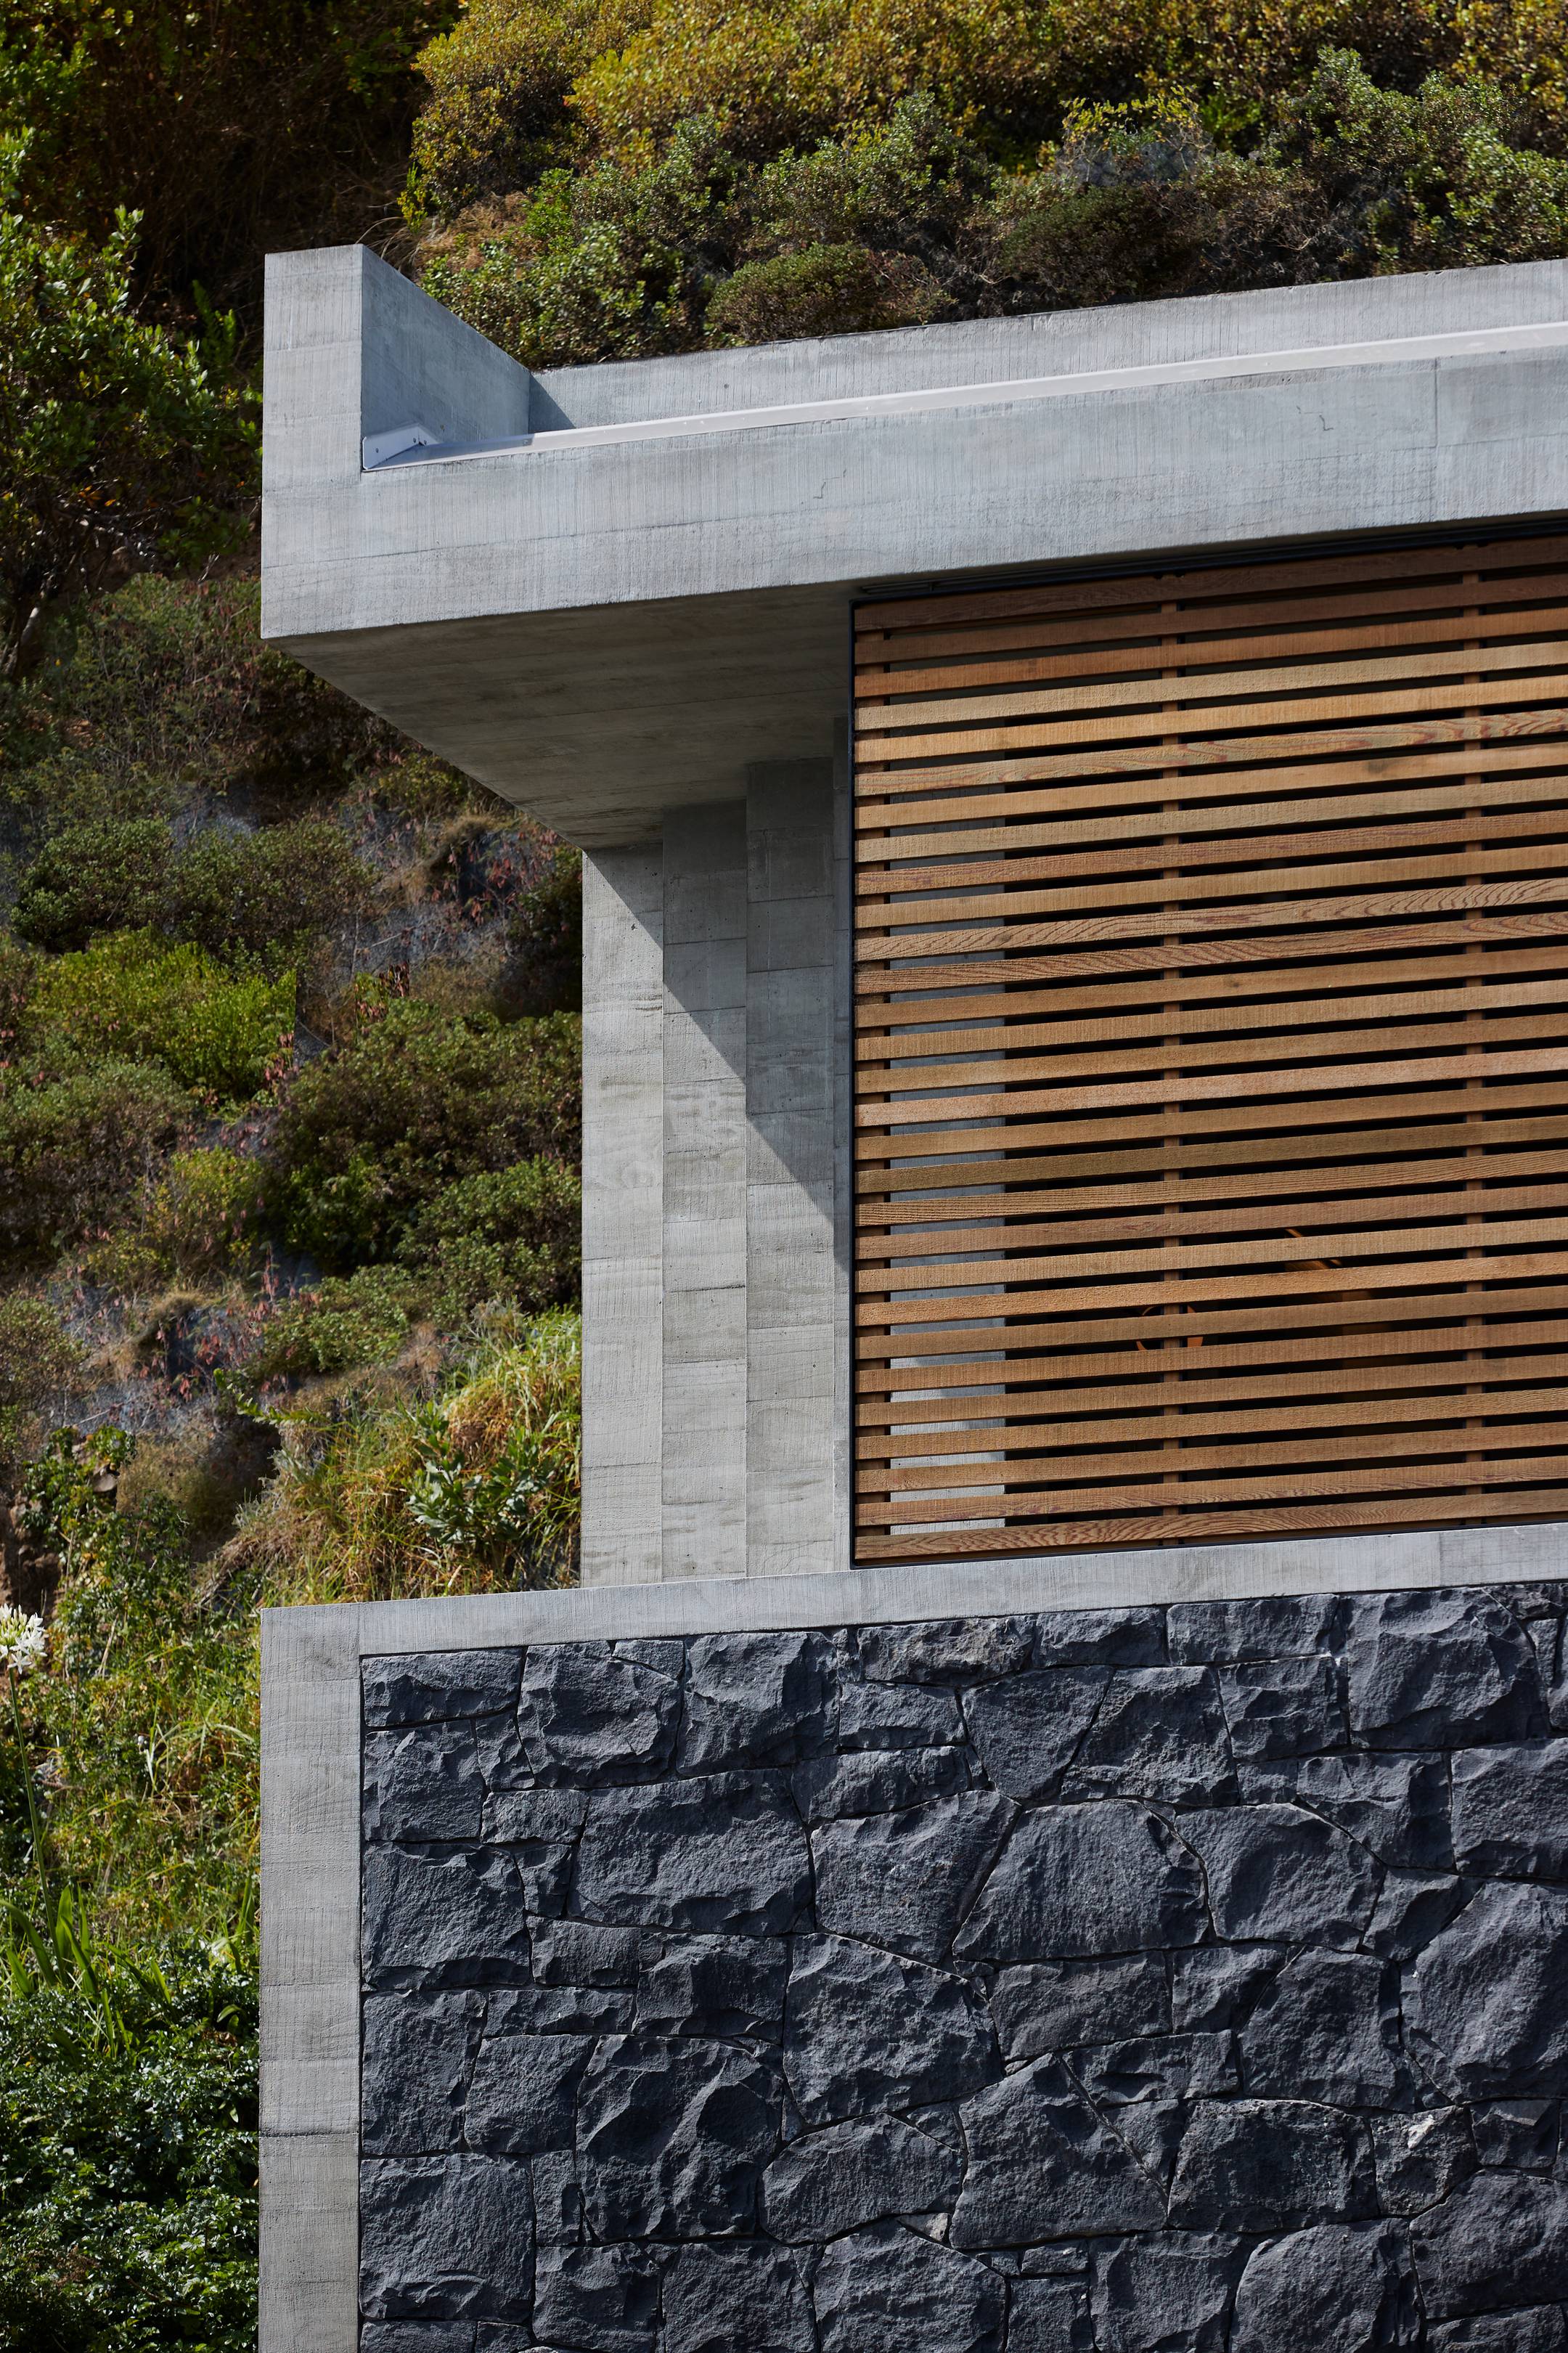 Onetangi Cliff house by Herbst Architects